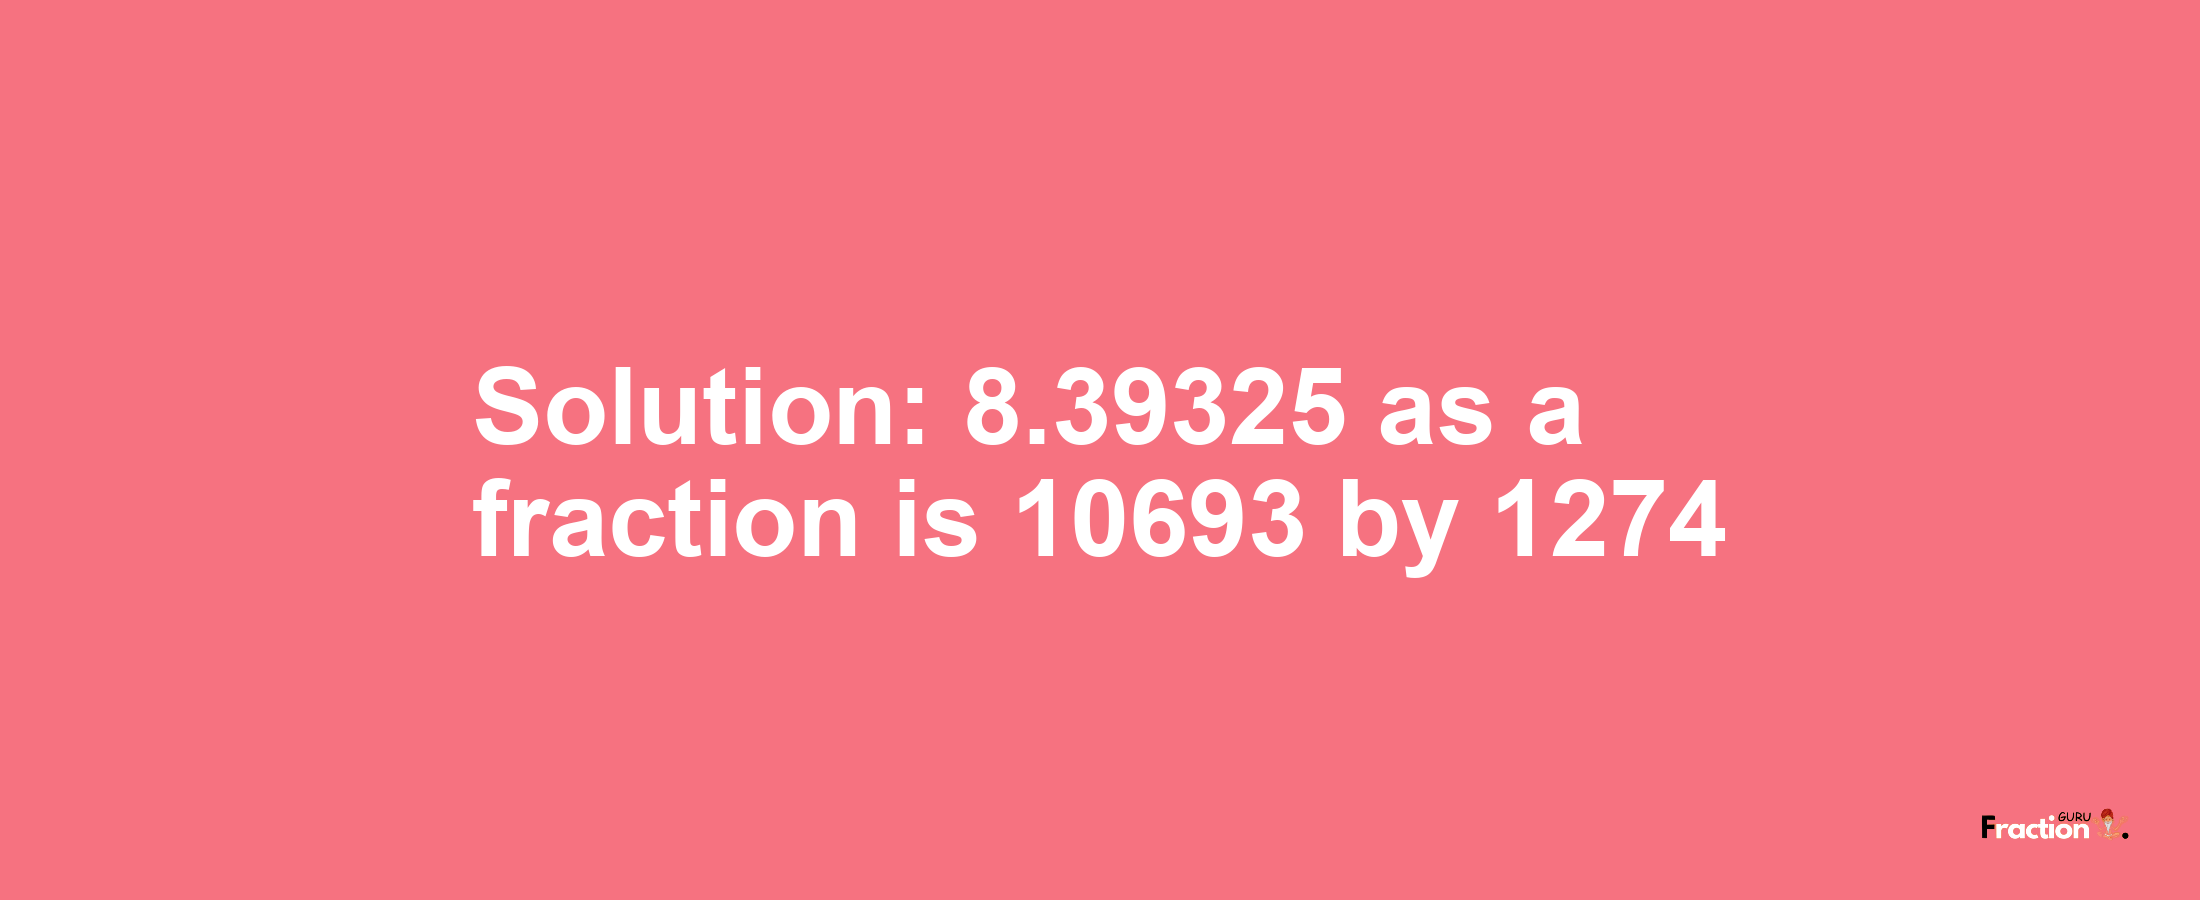 Solution:8.39325 as a fraction is 10693/1274